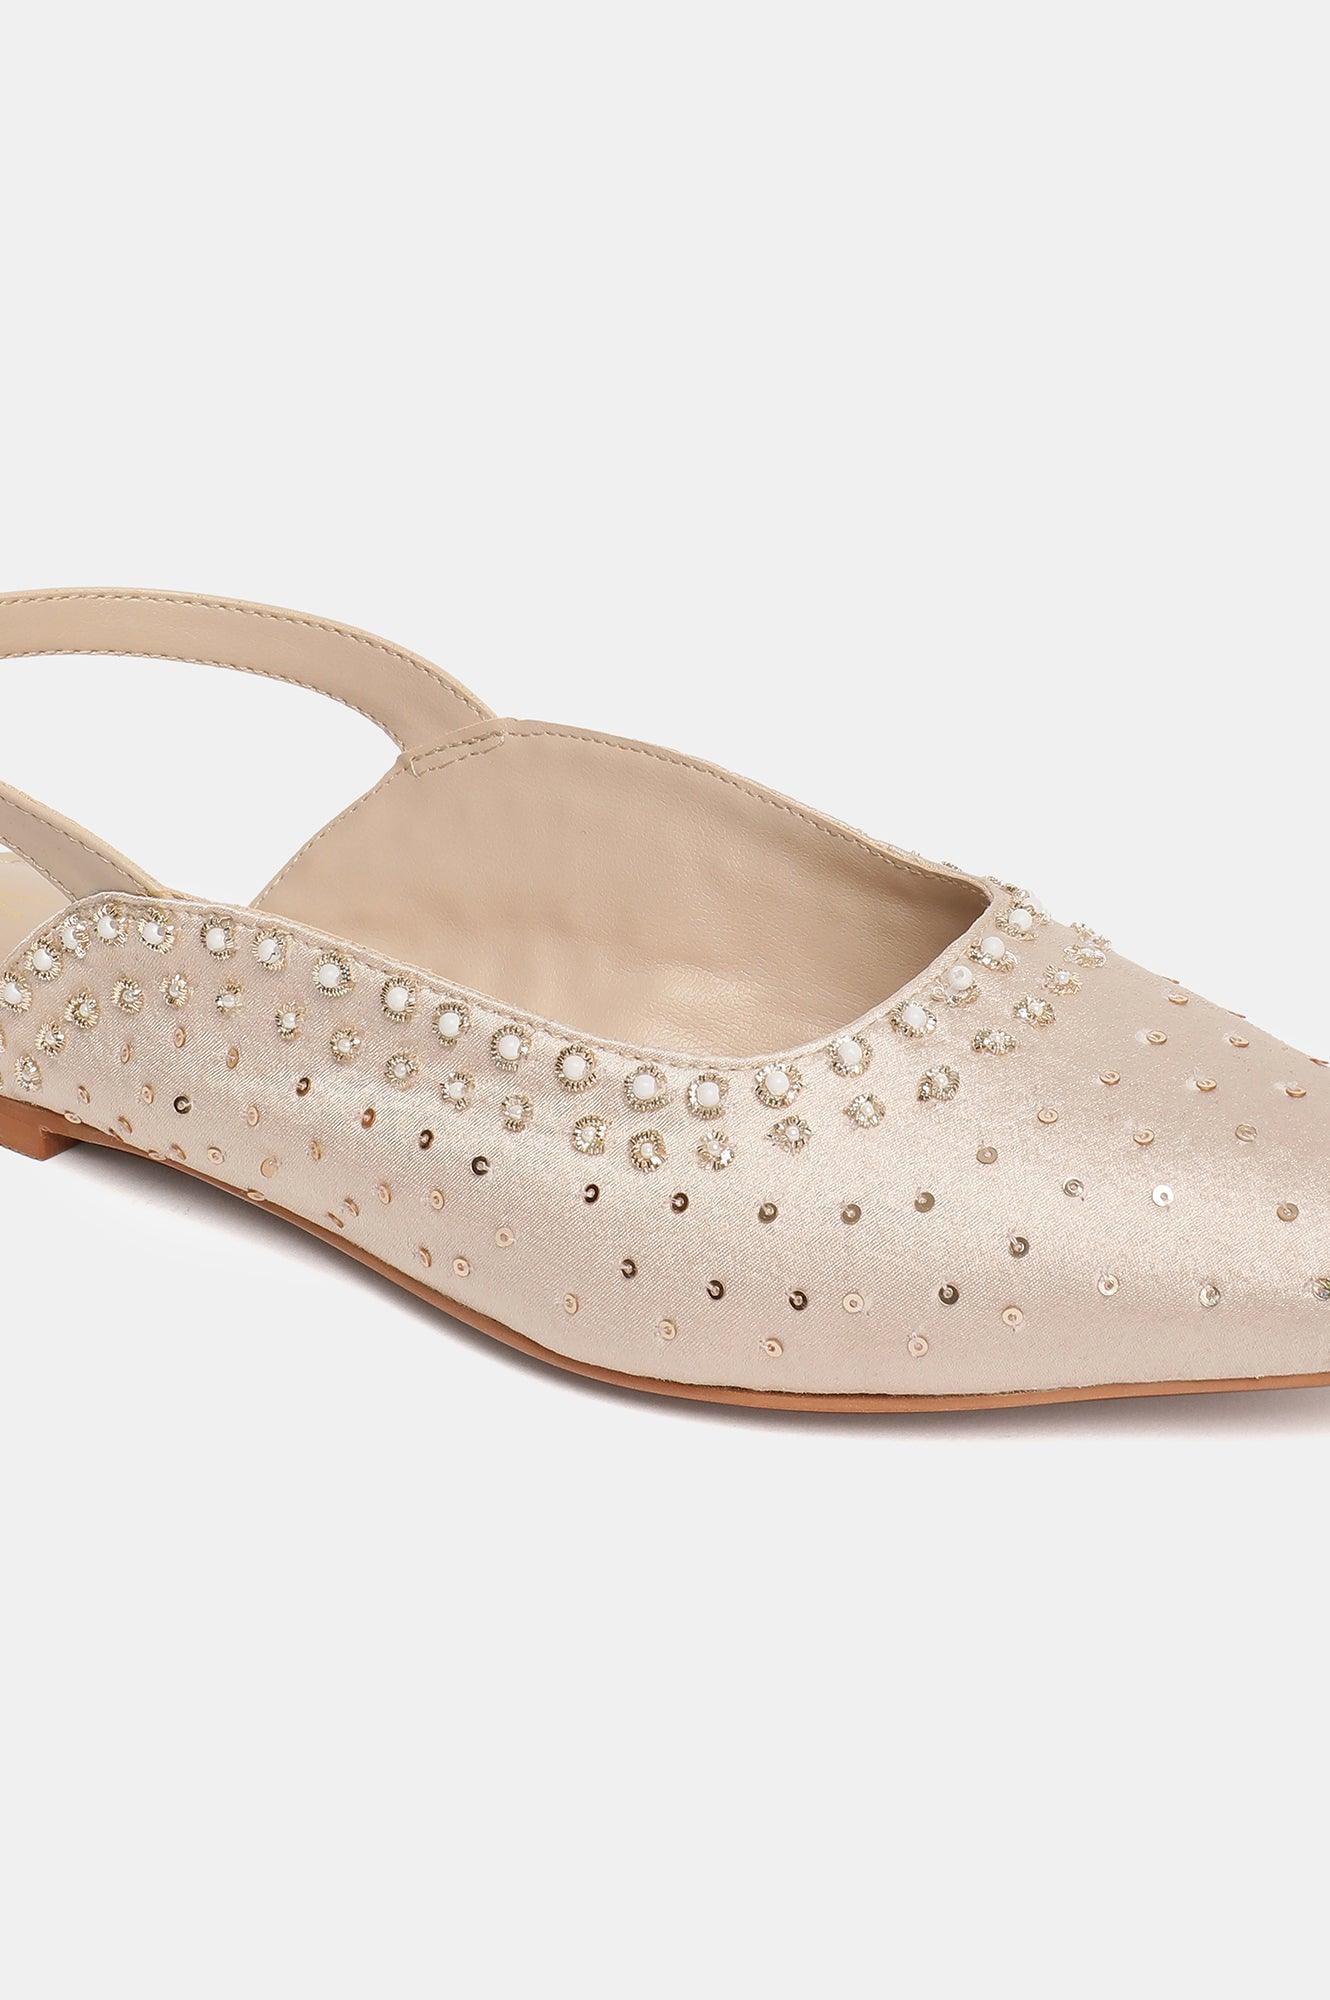 W Beige Embroidered Pointed Toe Flat-Wcharlotte - wforwoman